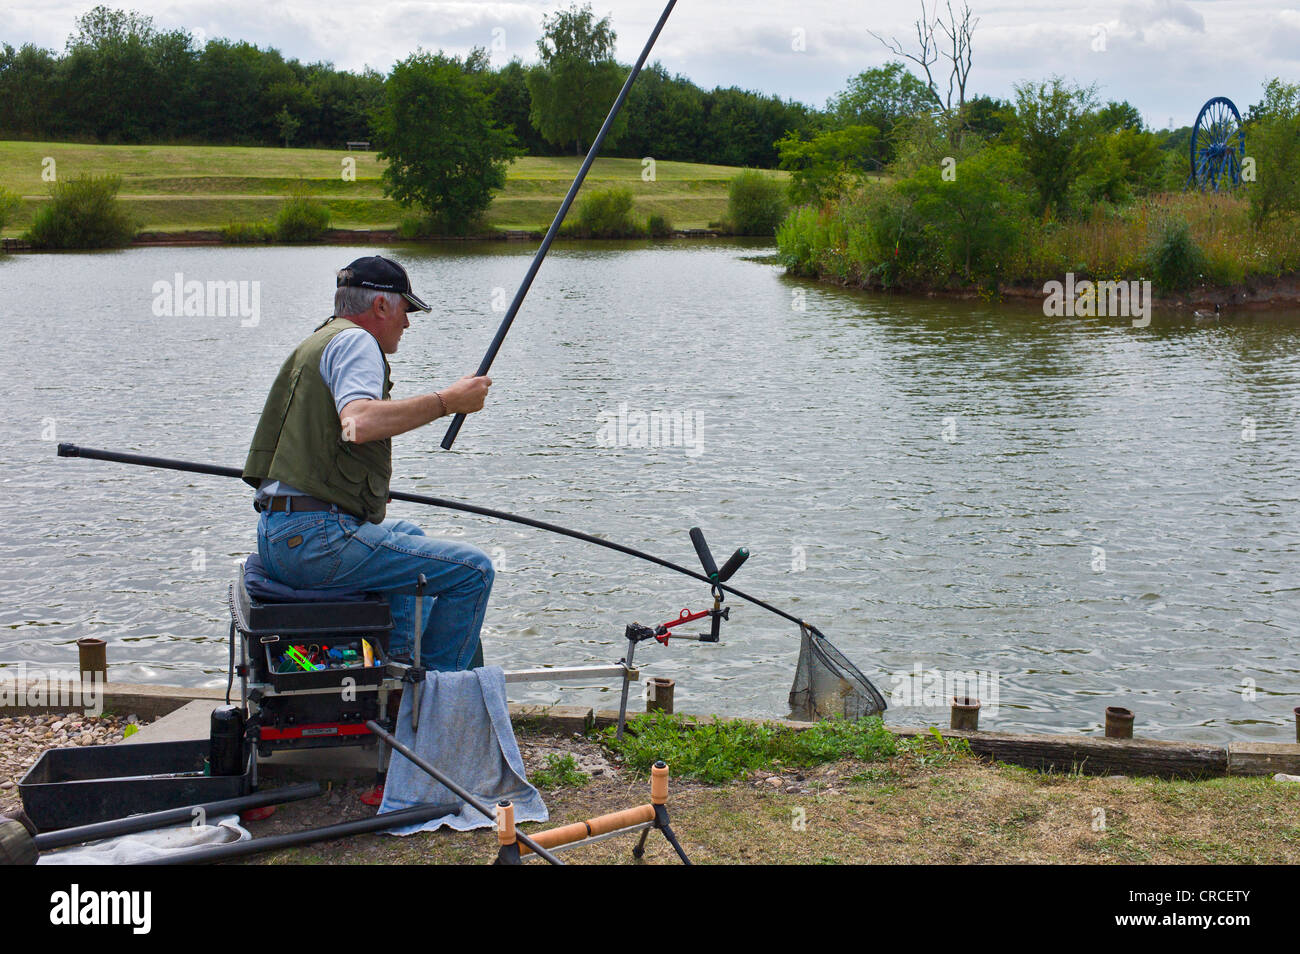 Pole fishing for carp at a lake in Leicestershire Stock Photo - Alamy